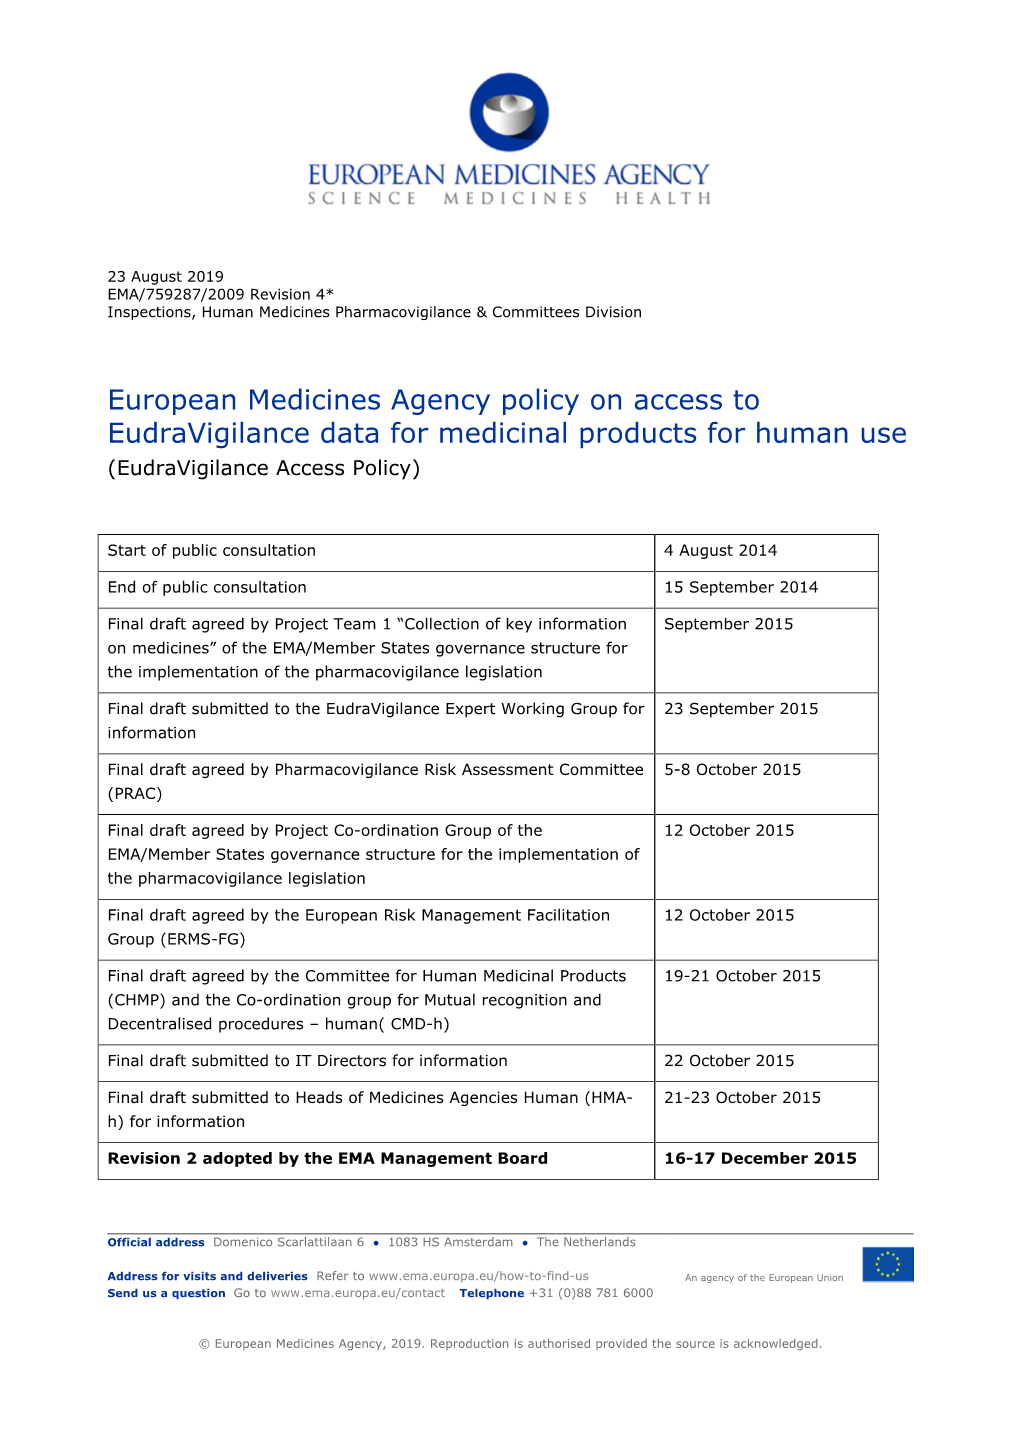 European Medicines Agency Policy on Access to Eudravigilance Data for Medicinal Products for Human Use (Eudravigilance Access Policy)